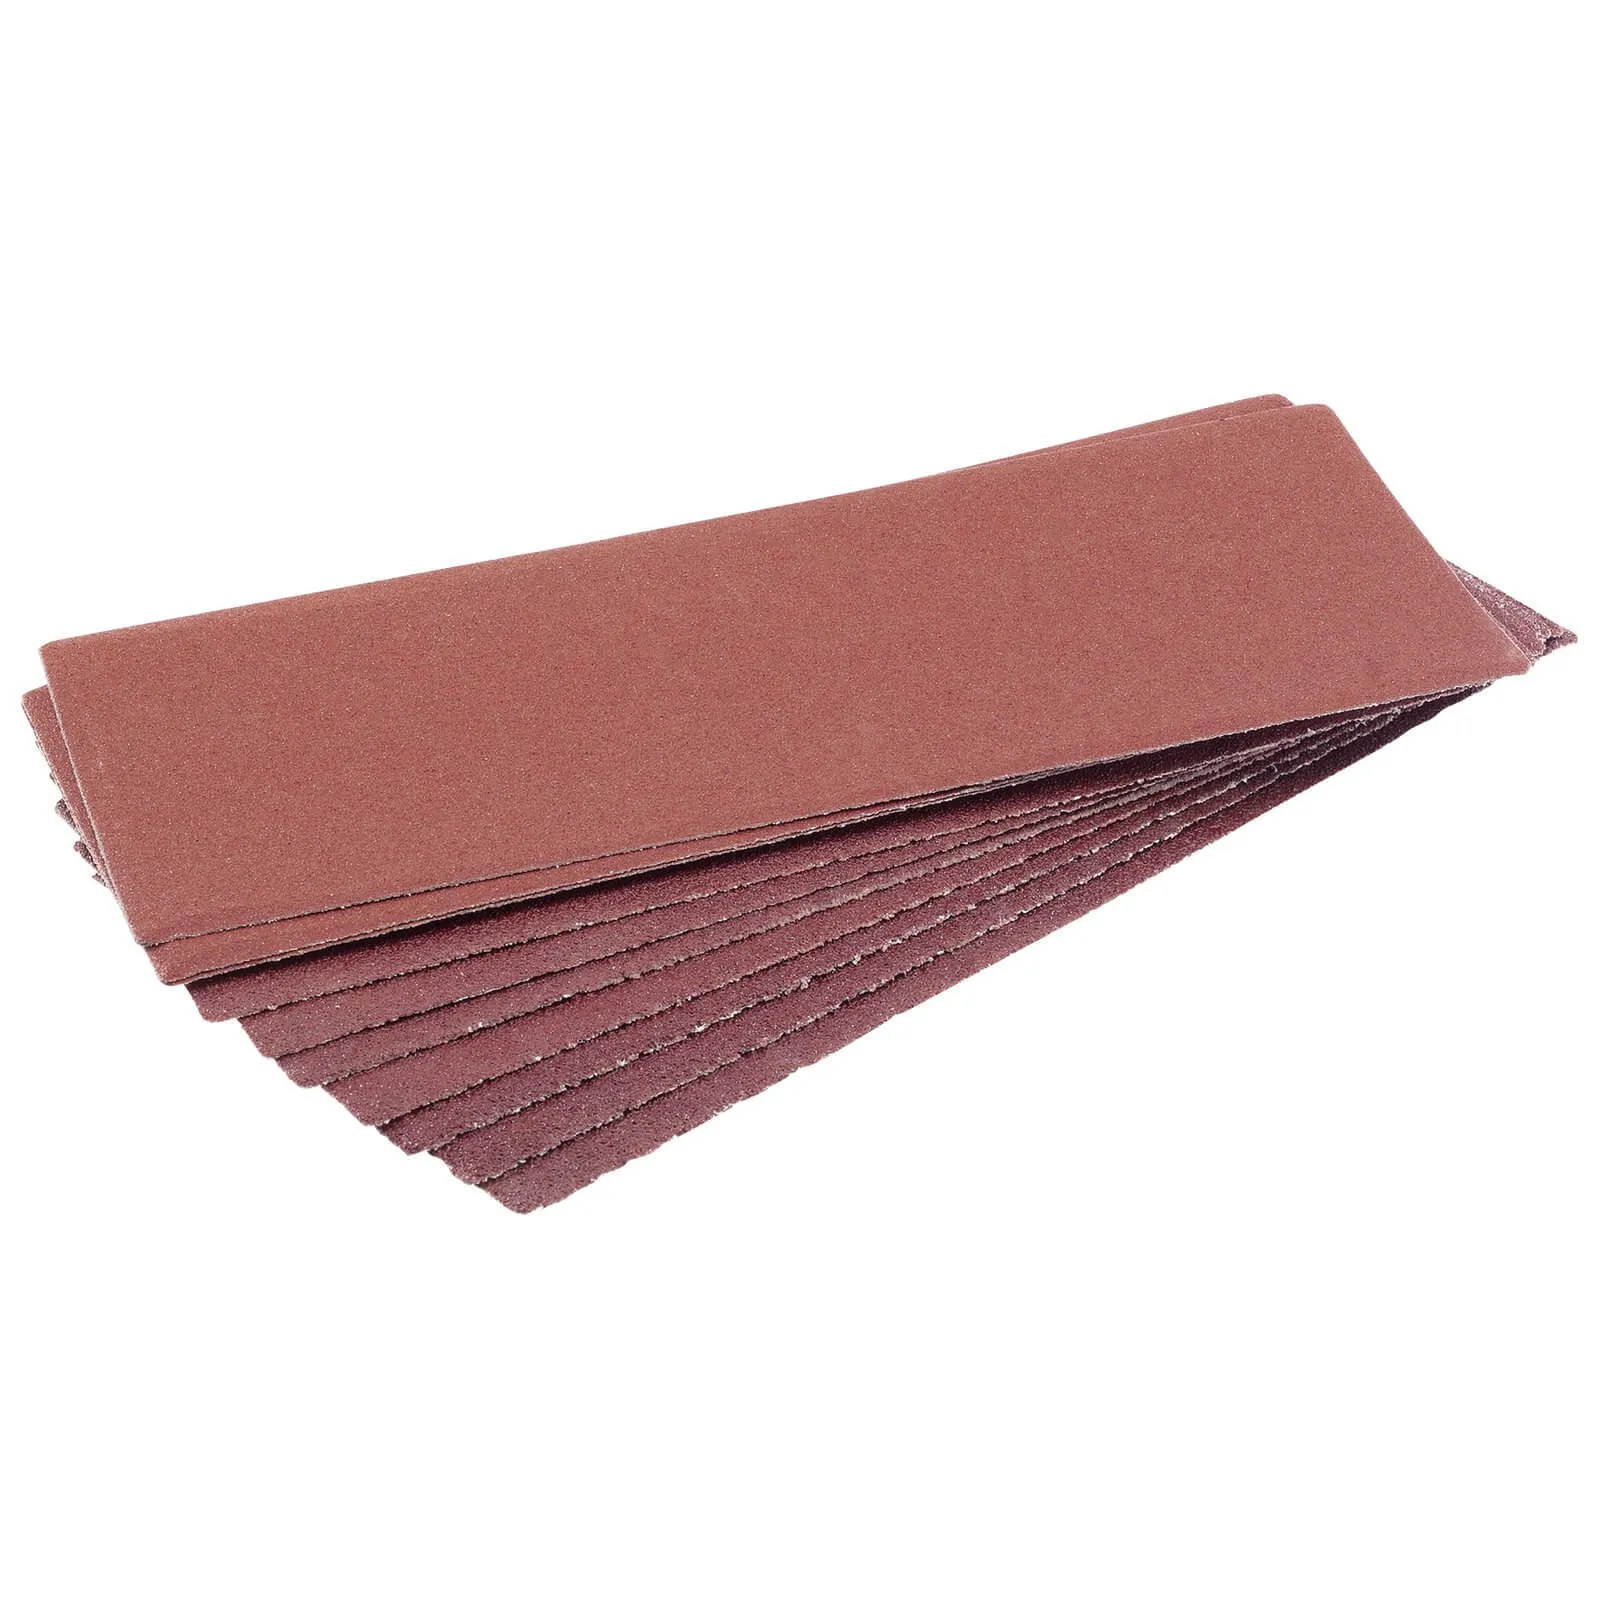 Draper Clip On 1/3 Sanding Sheets - 92mm x 232mm, Assorted, Pack of 10